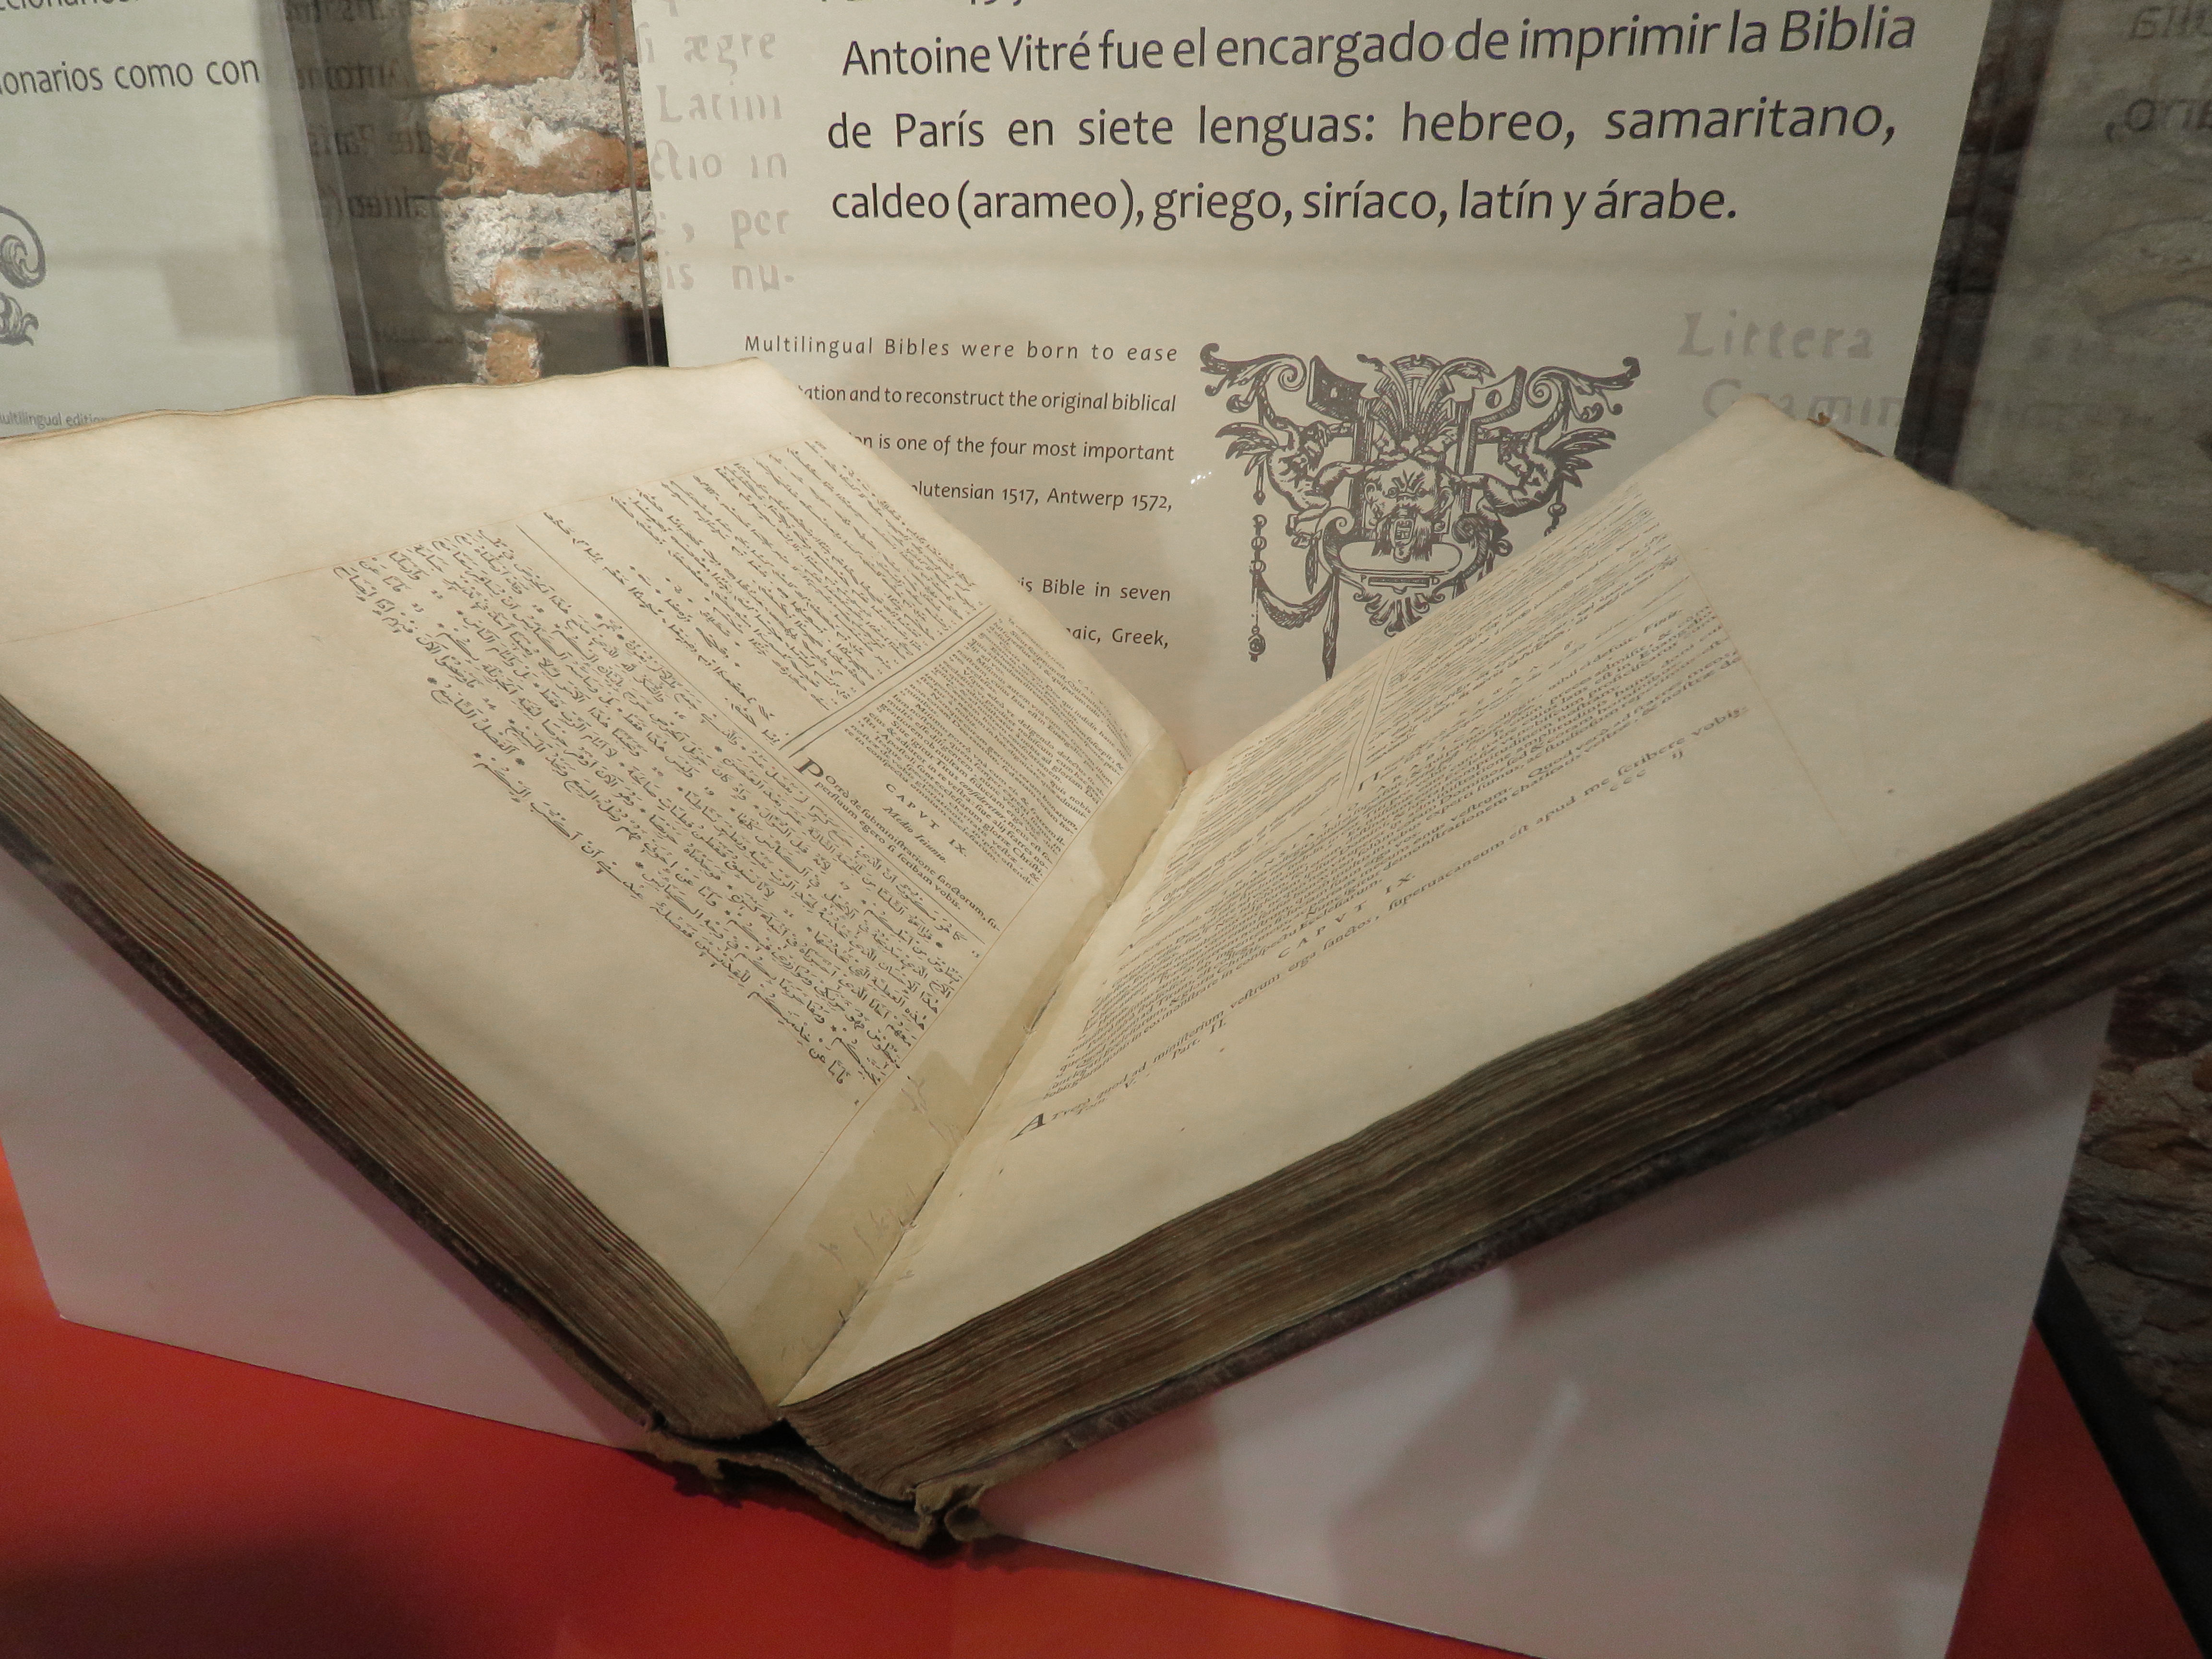 One of the most famous items in the collection of the national library in Córdoba: a Bible in seven different languages